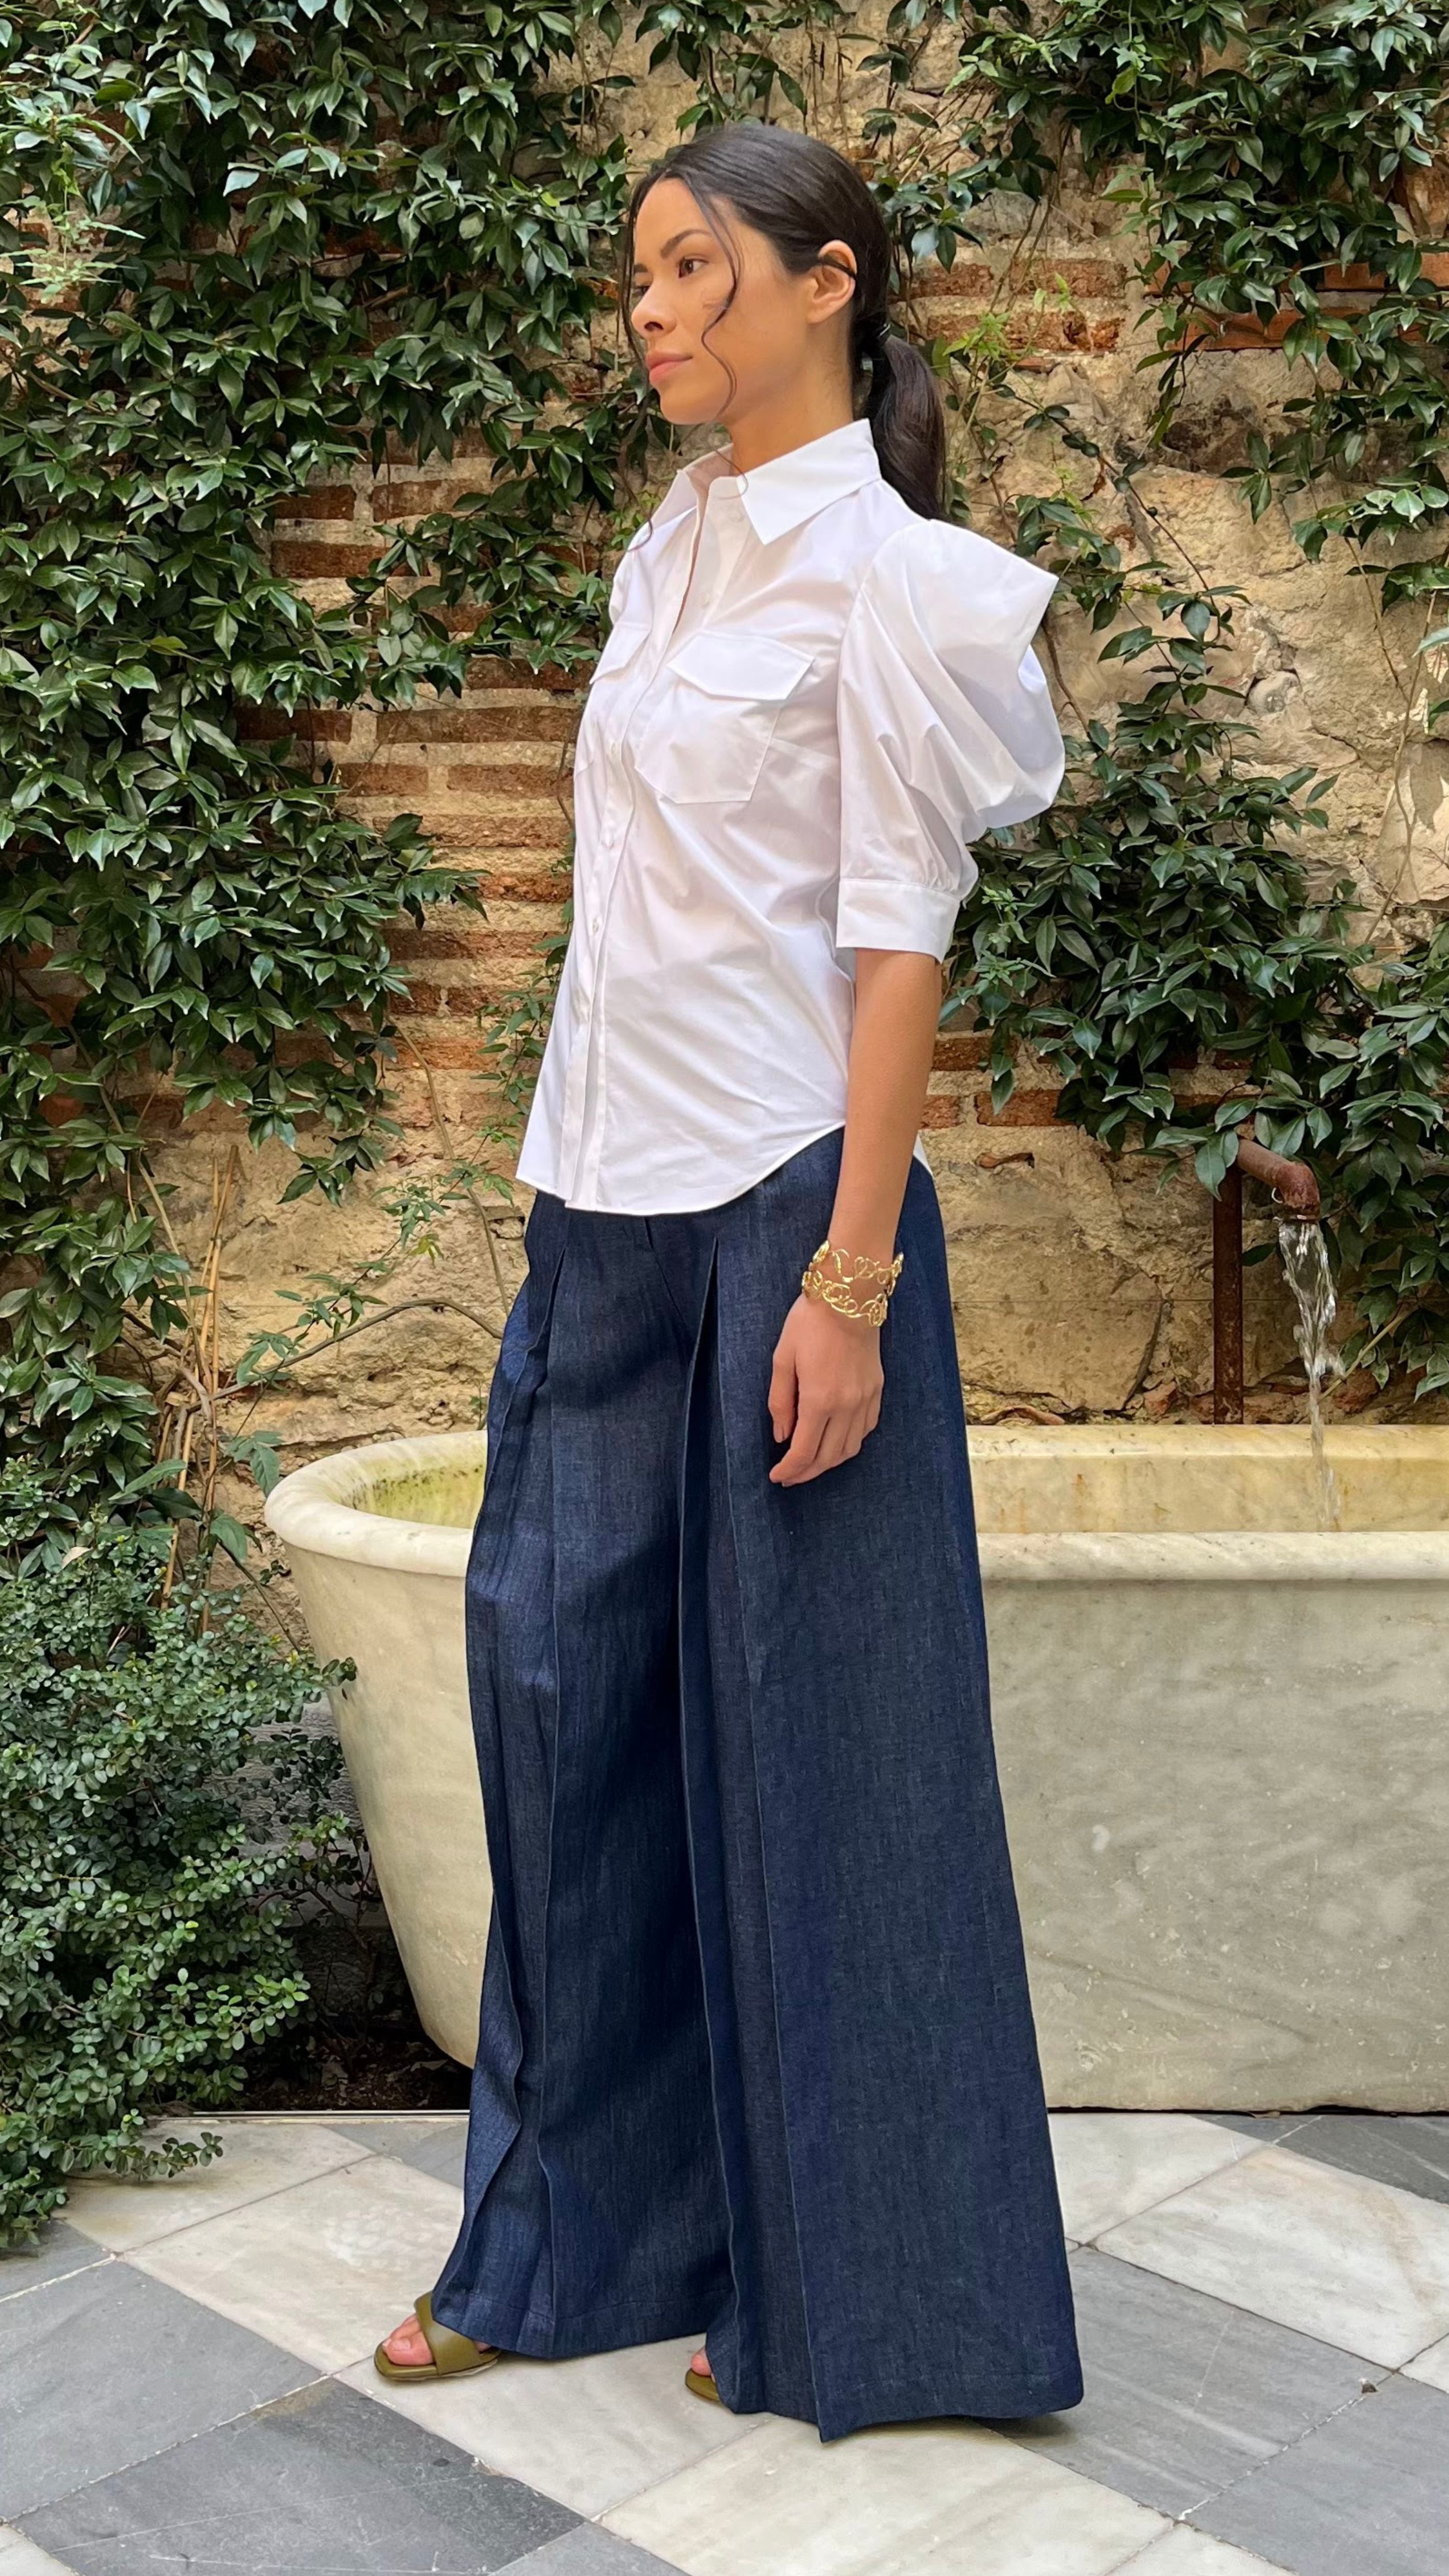 Rochas Paris Cotton Poplin Short Sleeved Shirt. A button up blouse in lightweight cotton it has two front pockets and puffed sleeves. Photo shown on model with a side view also wearing Rochas wide leg denim trousers.